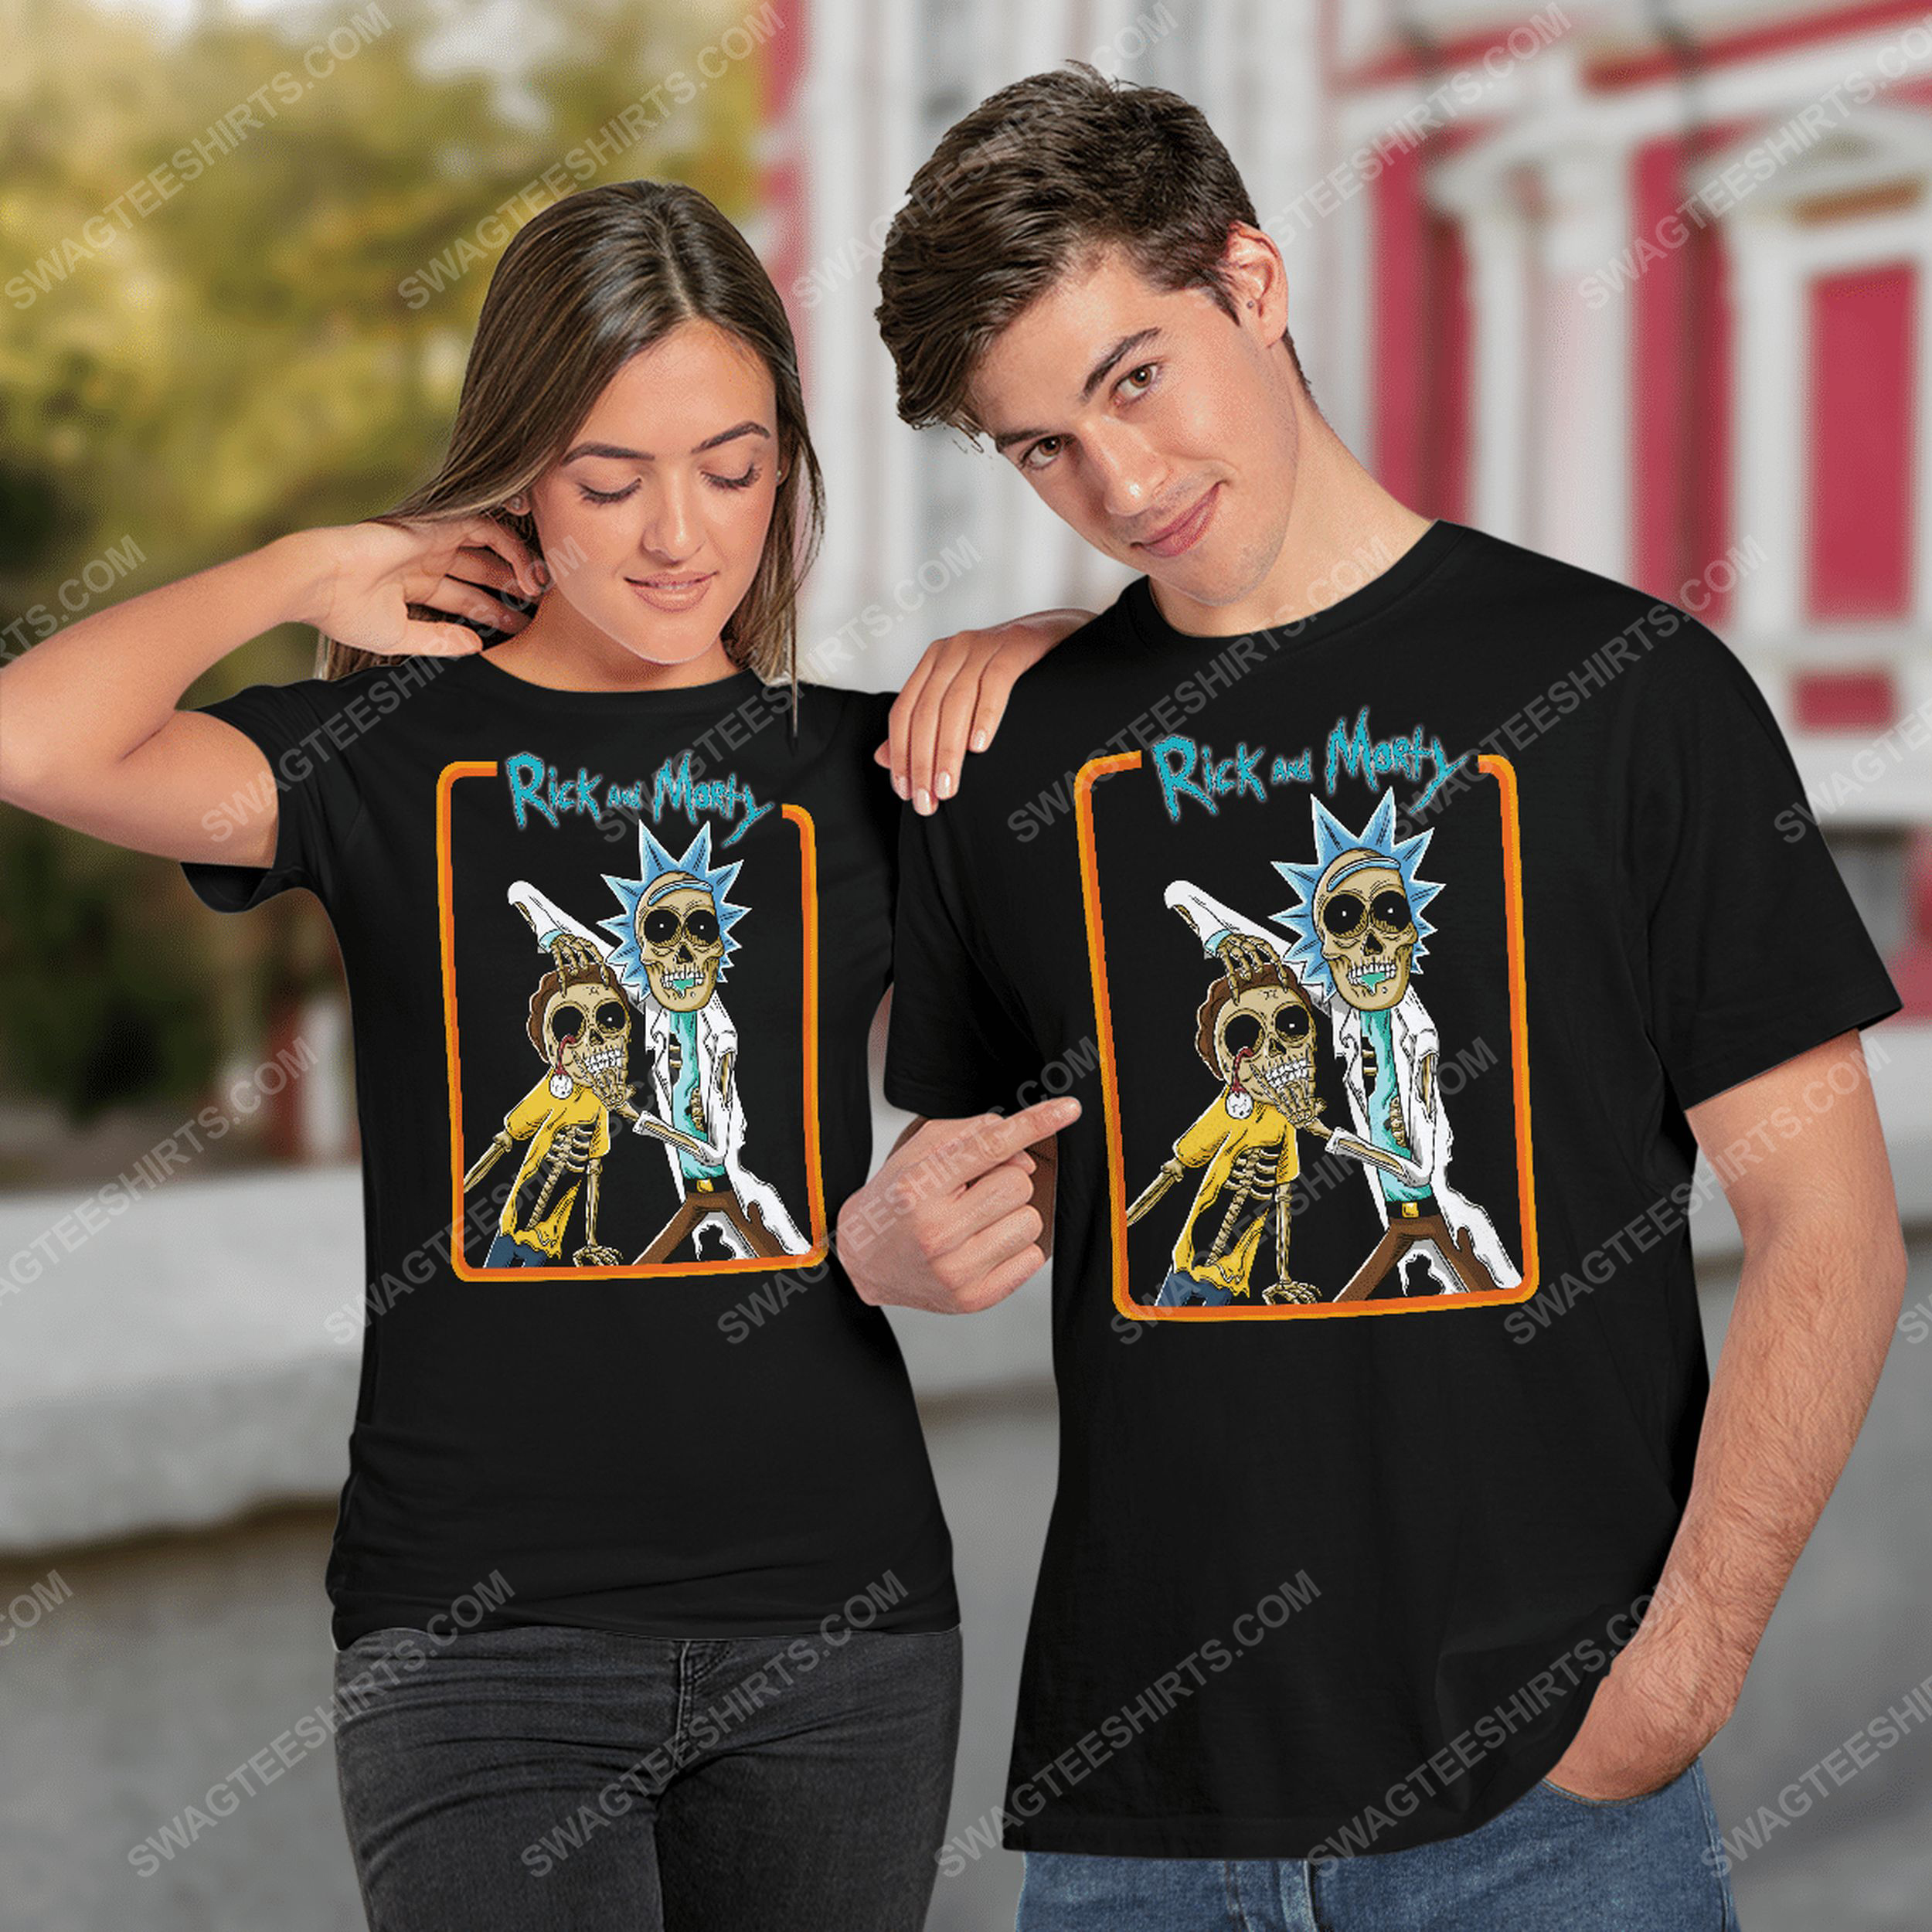 Rick and morty tv show zombie halloween tshirt(1)